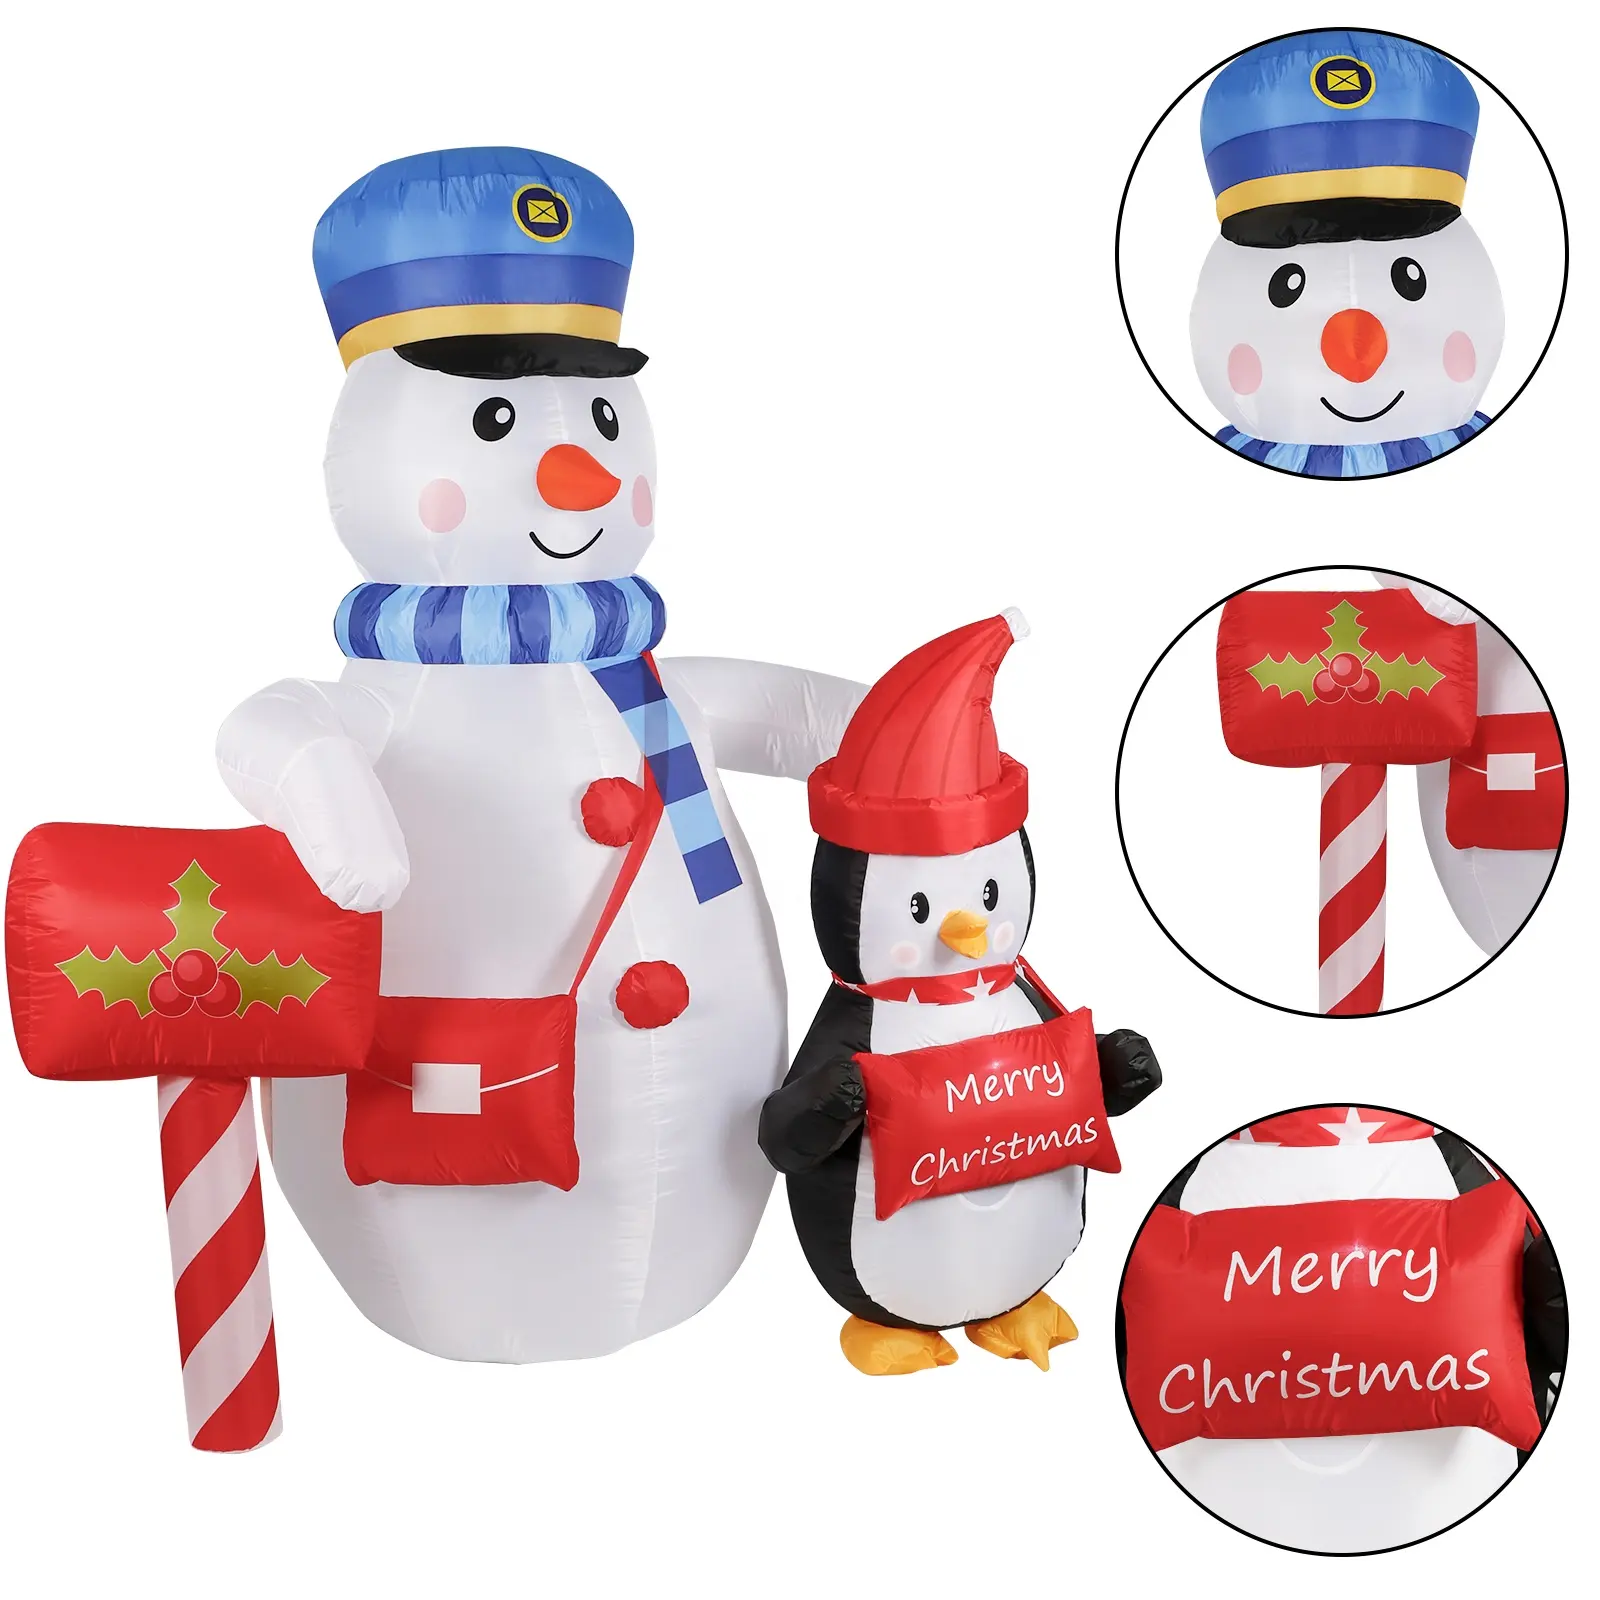 Ourwarm 5ft 8ft 6ft Christmas Inflatable Custom Snowman Ornament Outdoor Yard Decoration